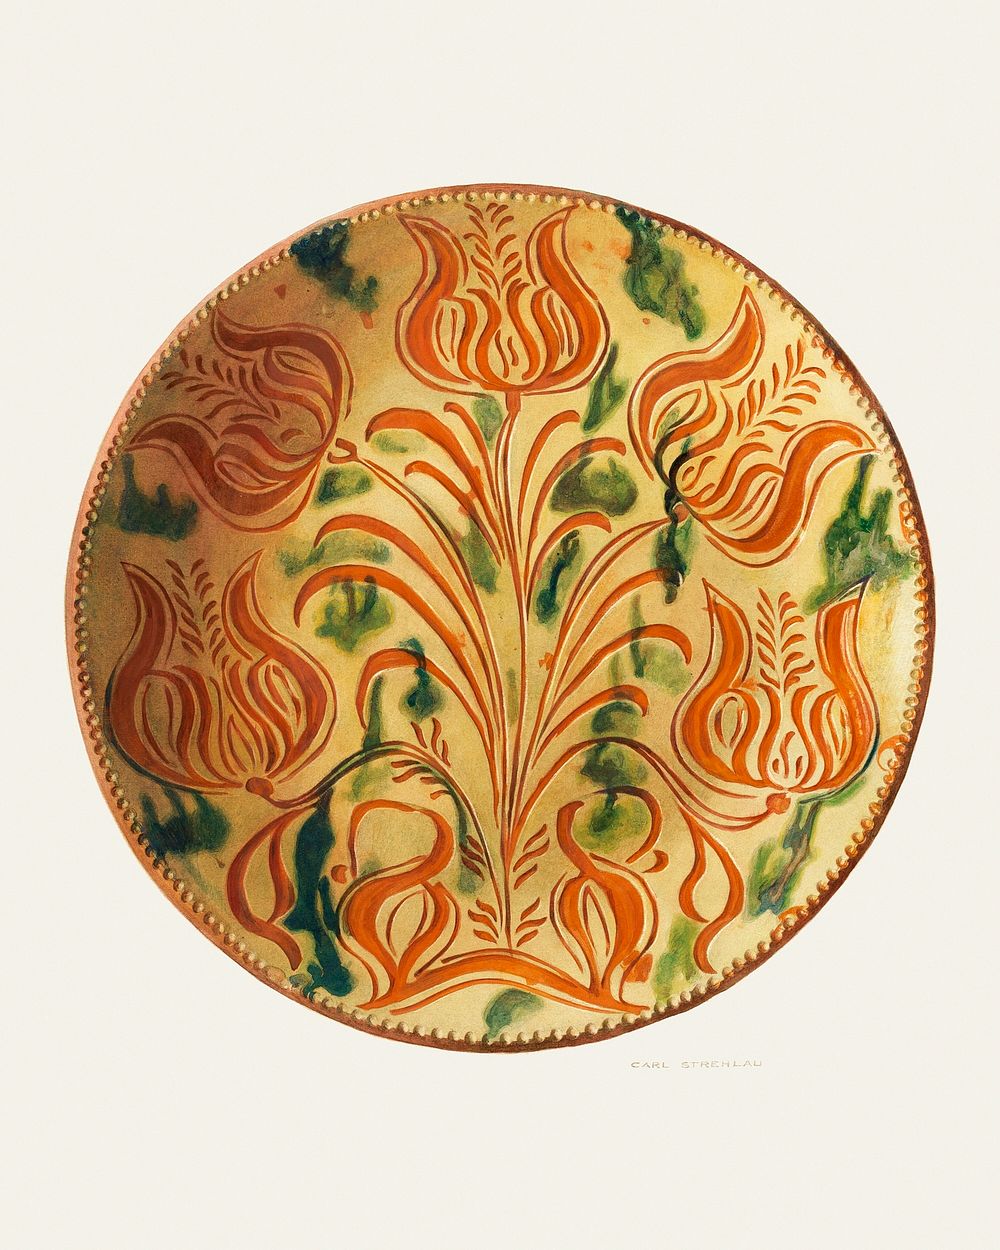 Pa. German Plate (ca. 1938) by Carl Strehlau. Original from The National Gallery of Art. Digitally enhanced by rawpixel.